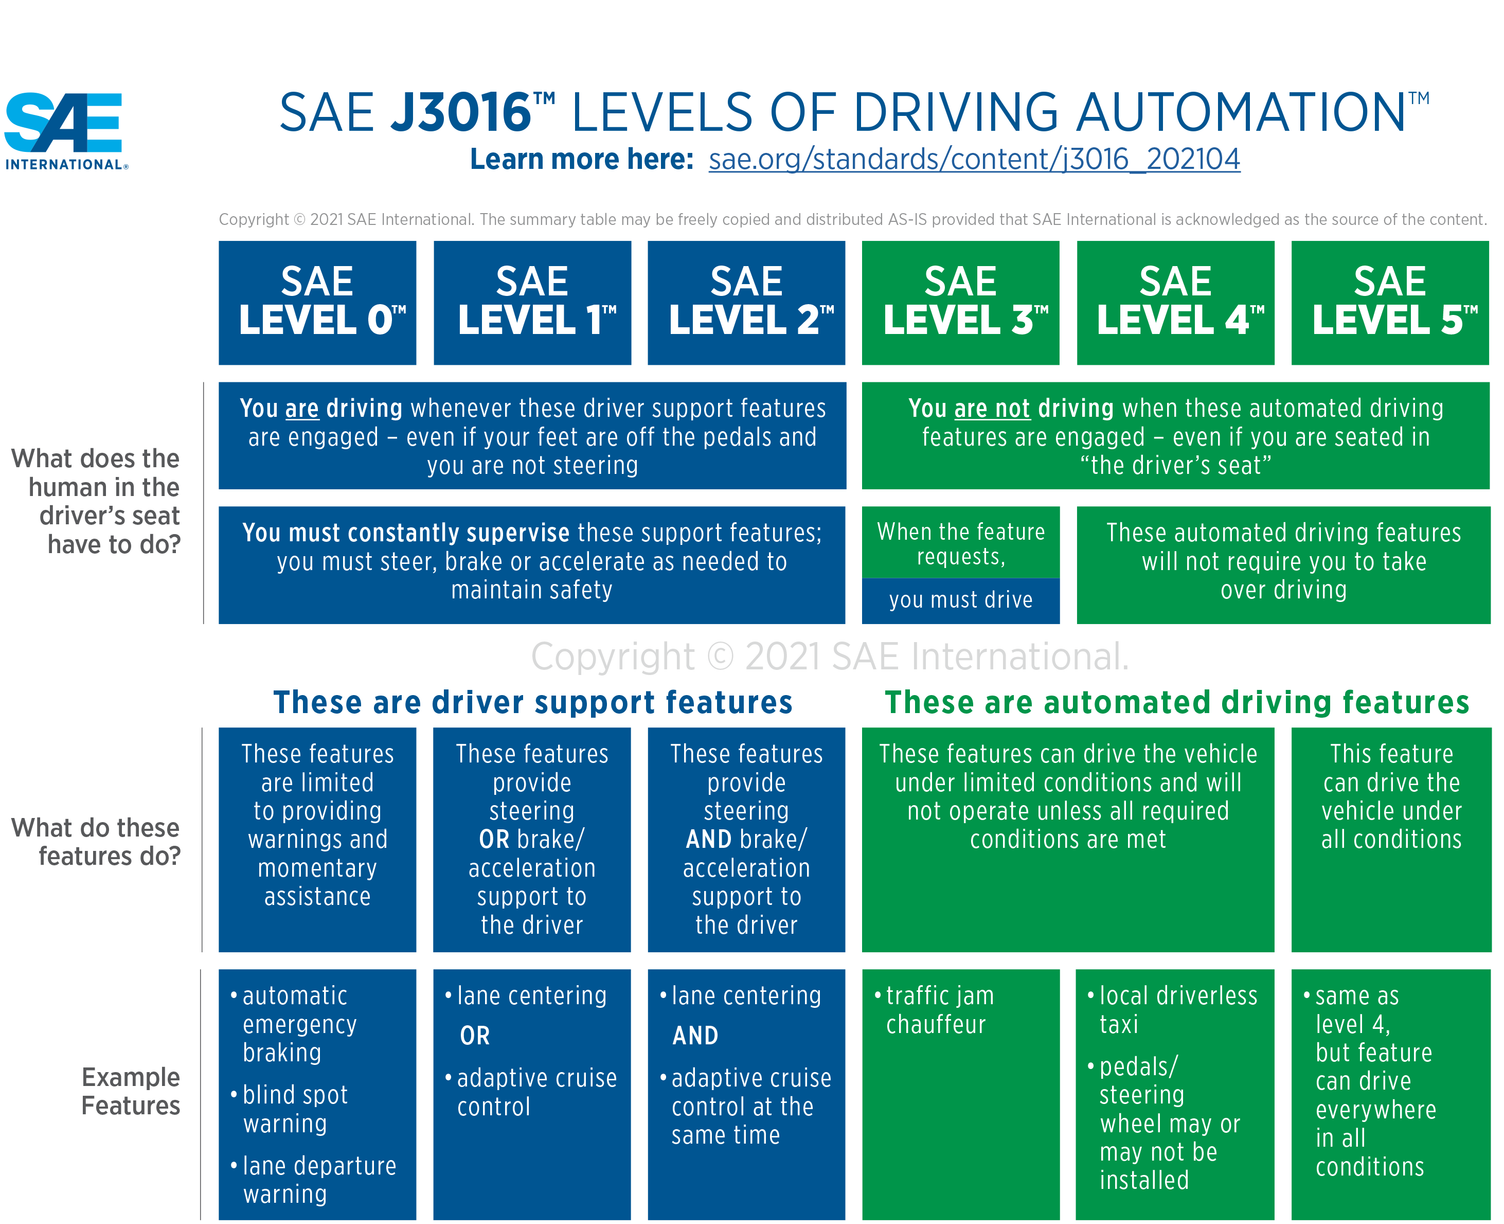 Description of SAE Levels of driving automation